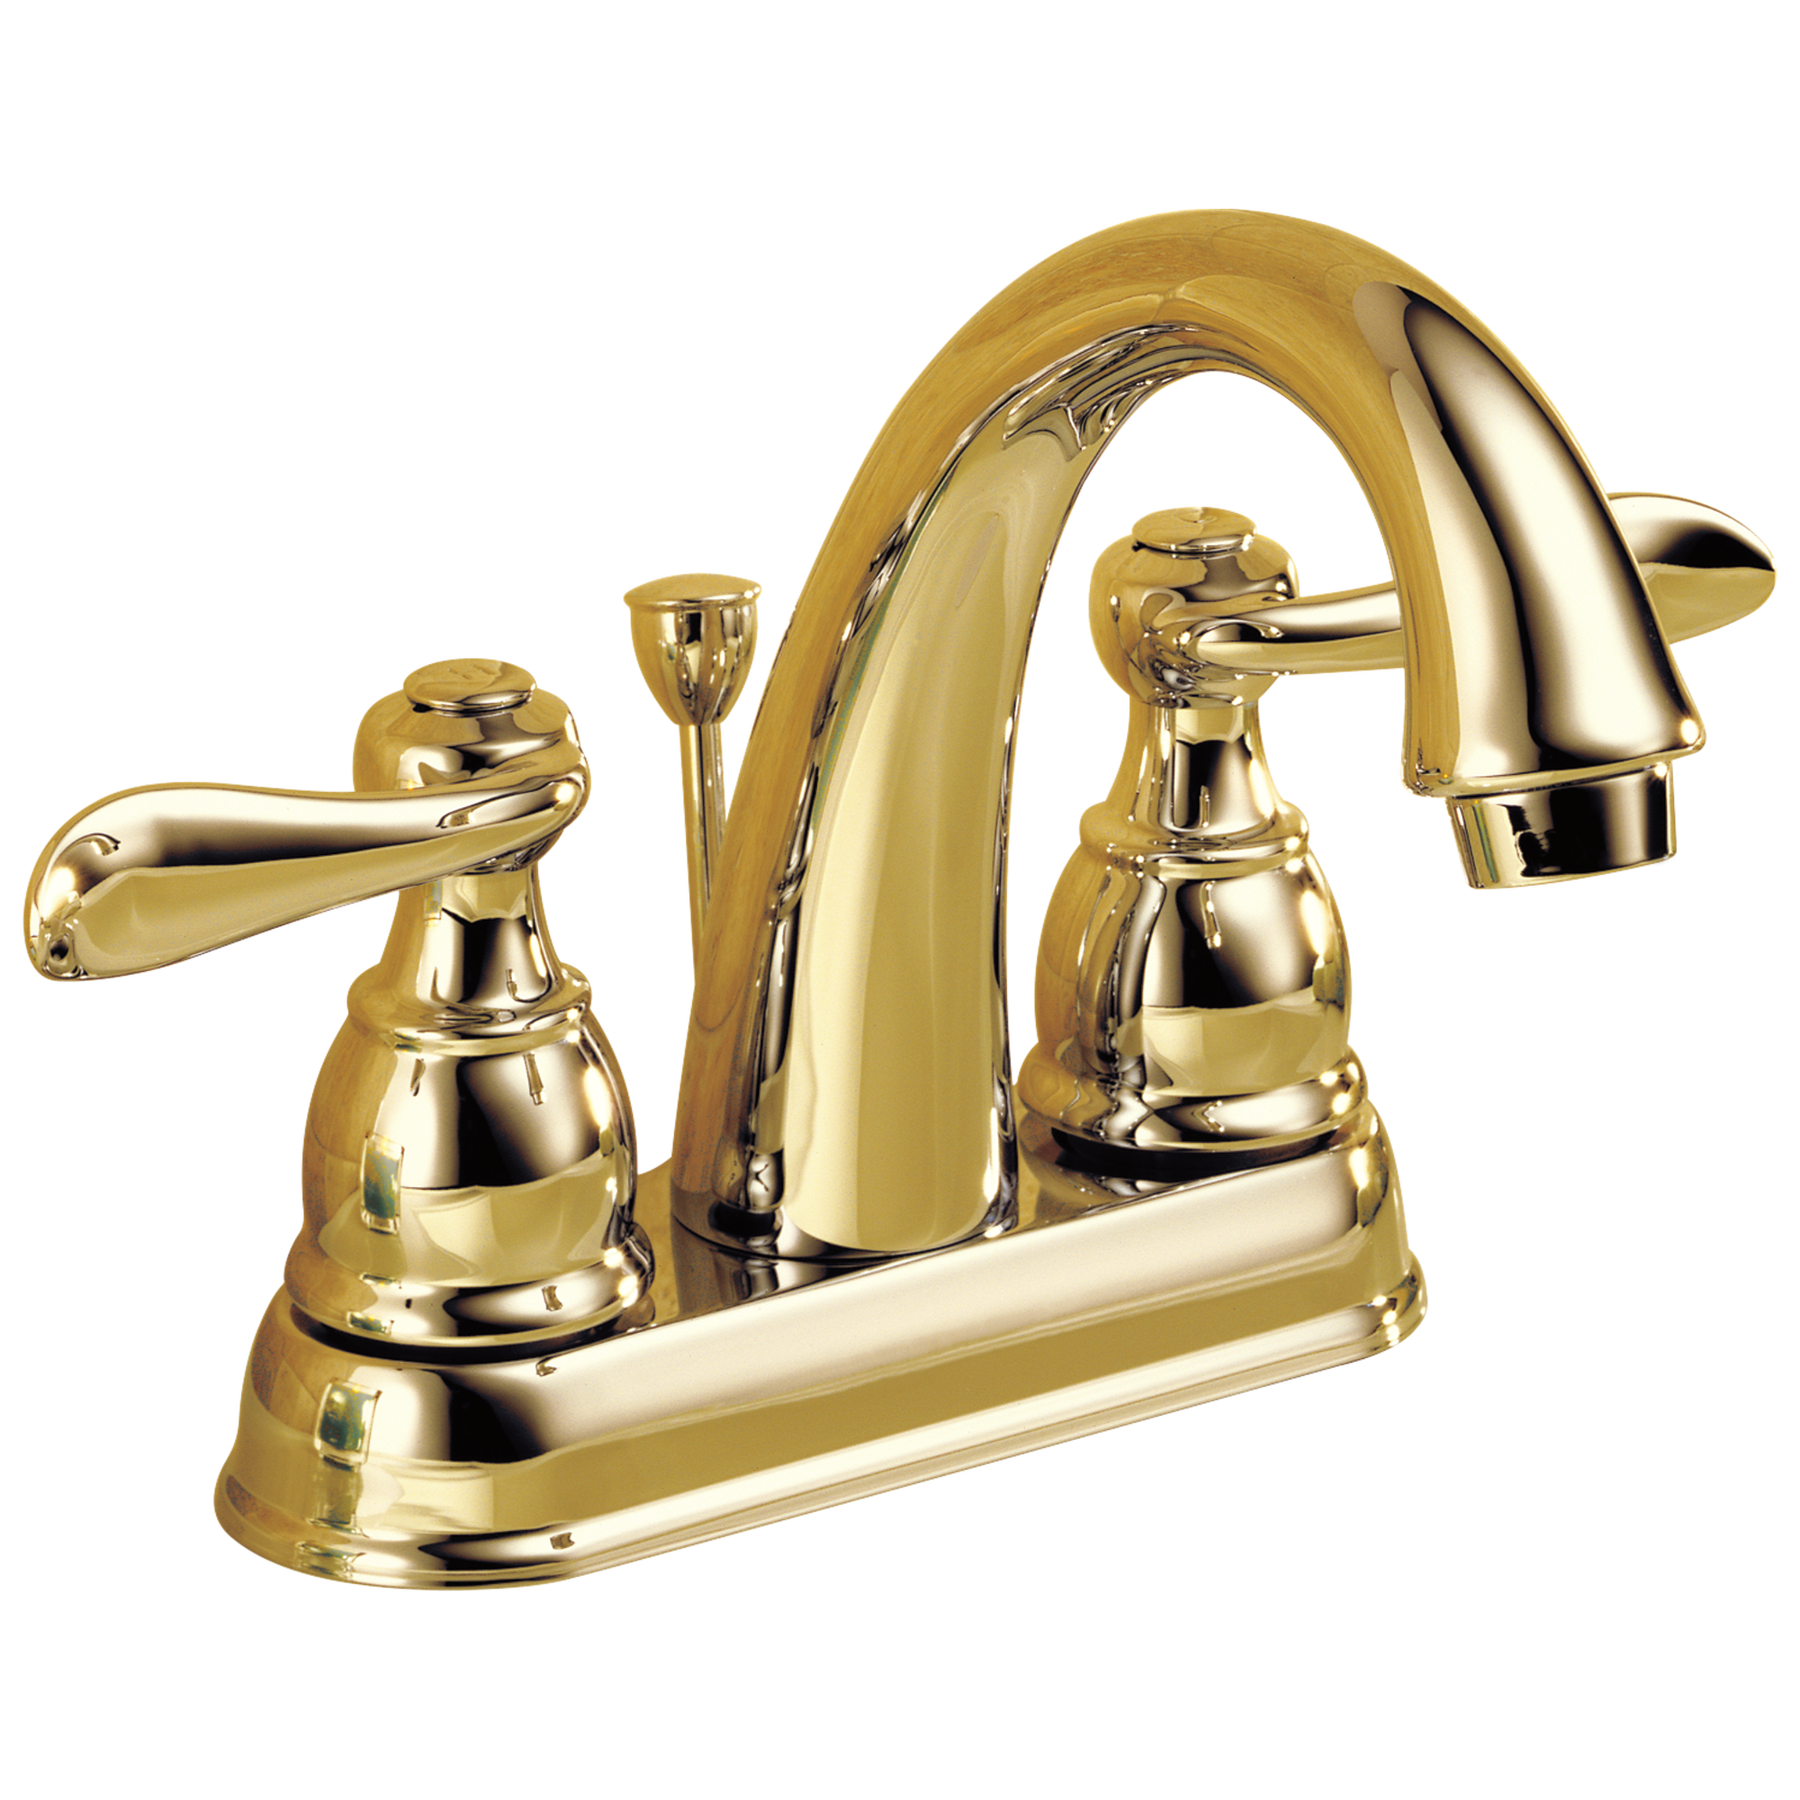 Two Handle Centerset Bathroom Faucet in Polished Brass 25996LF-PB